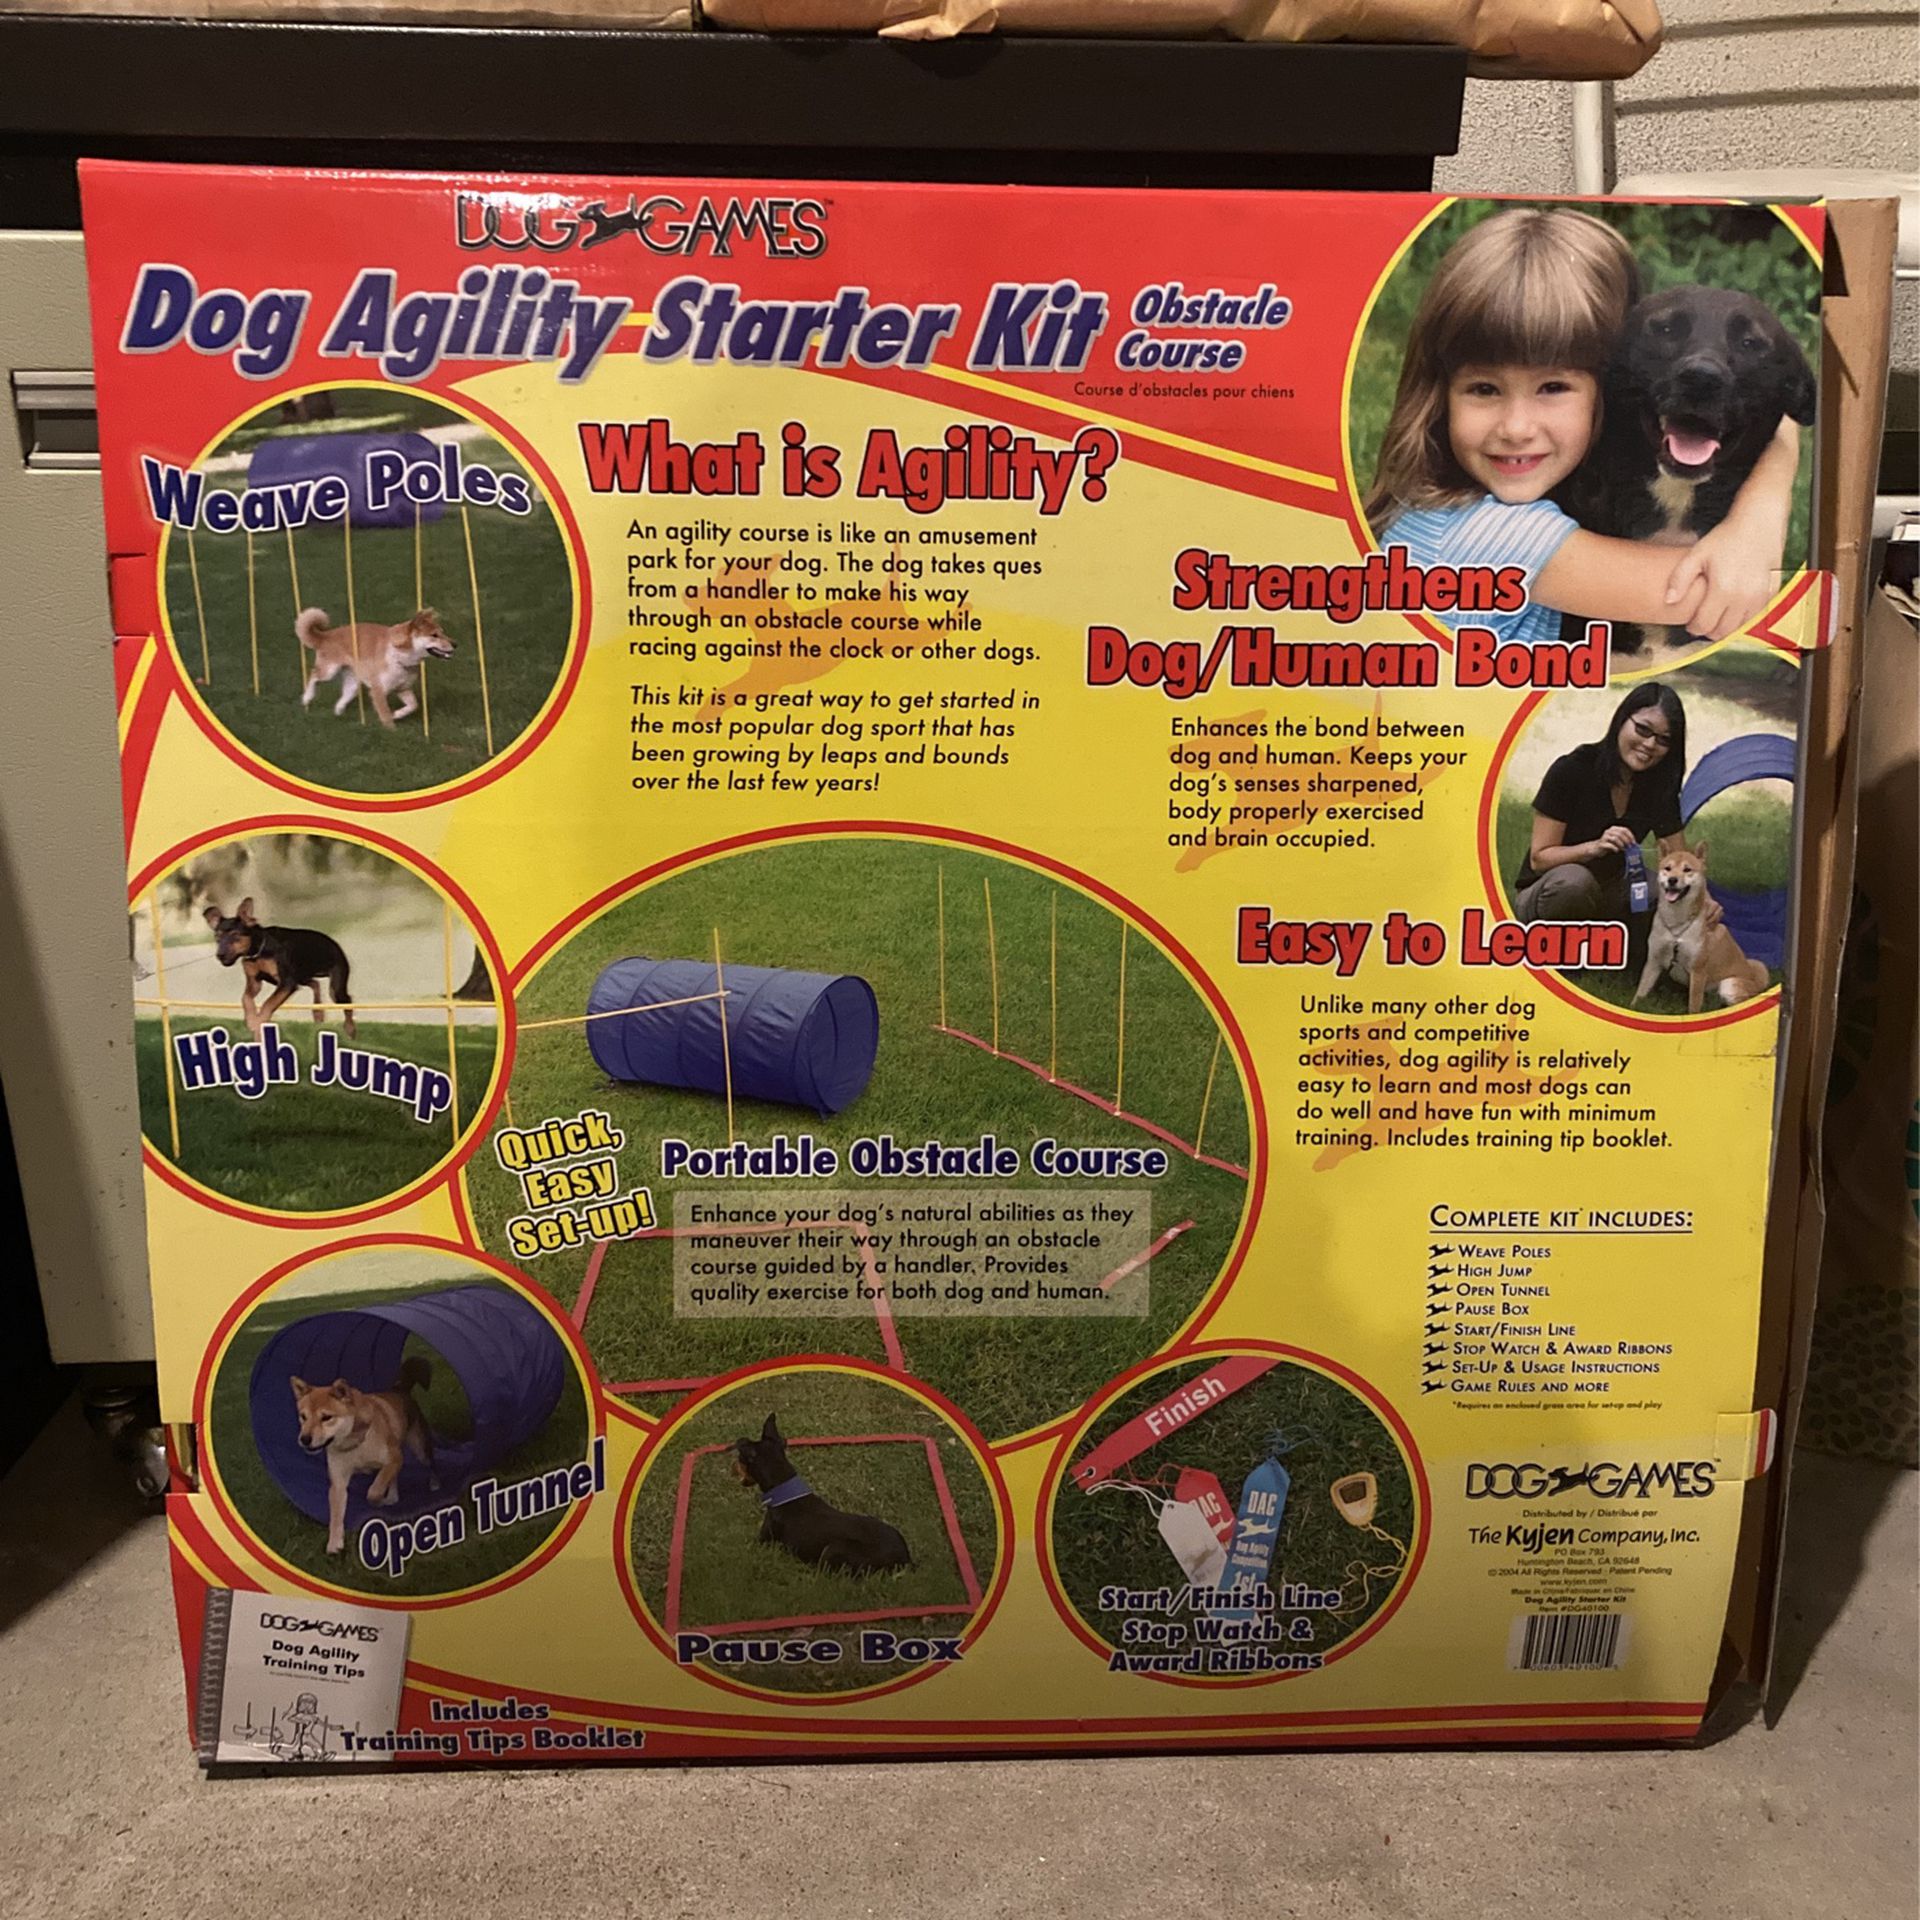 Dog Agility Starter Kit Obstacle Course